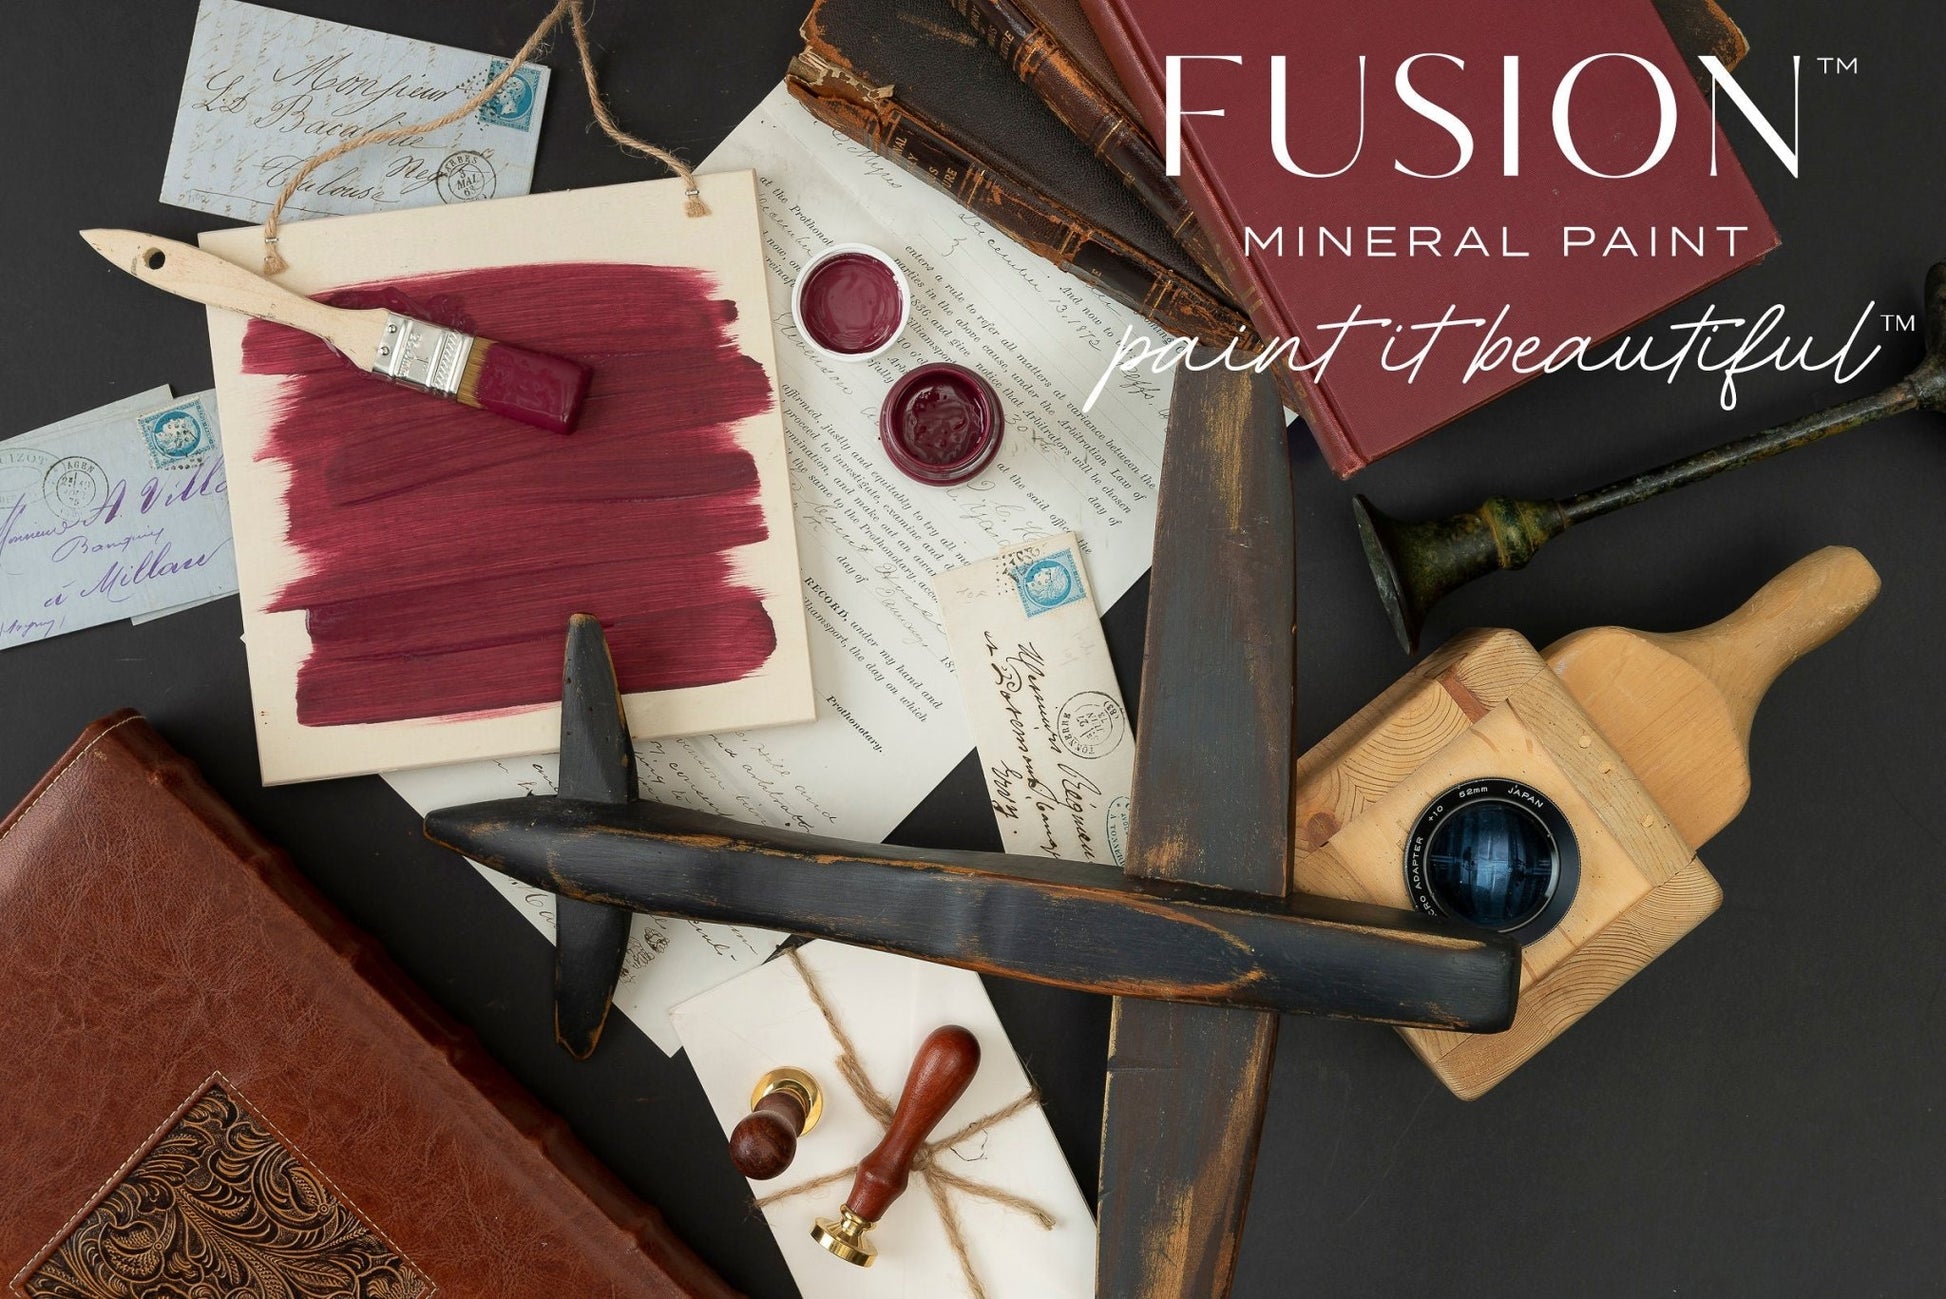 Fusion Mineral Paint - Winchester - Rustic River Home